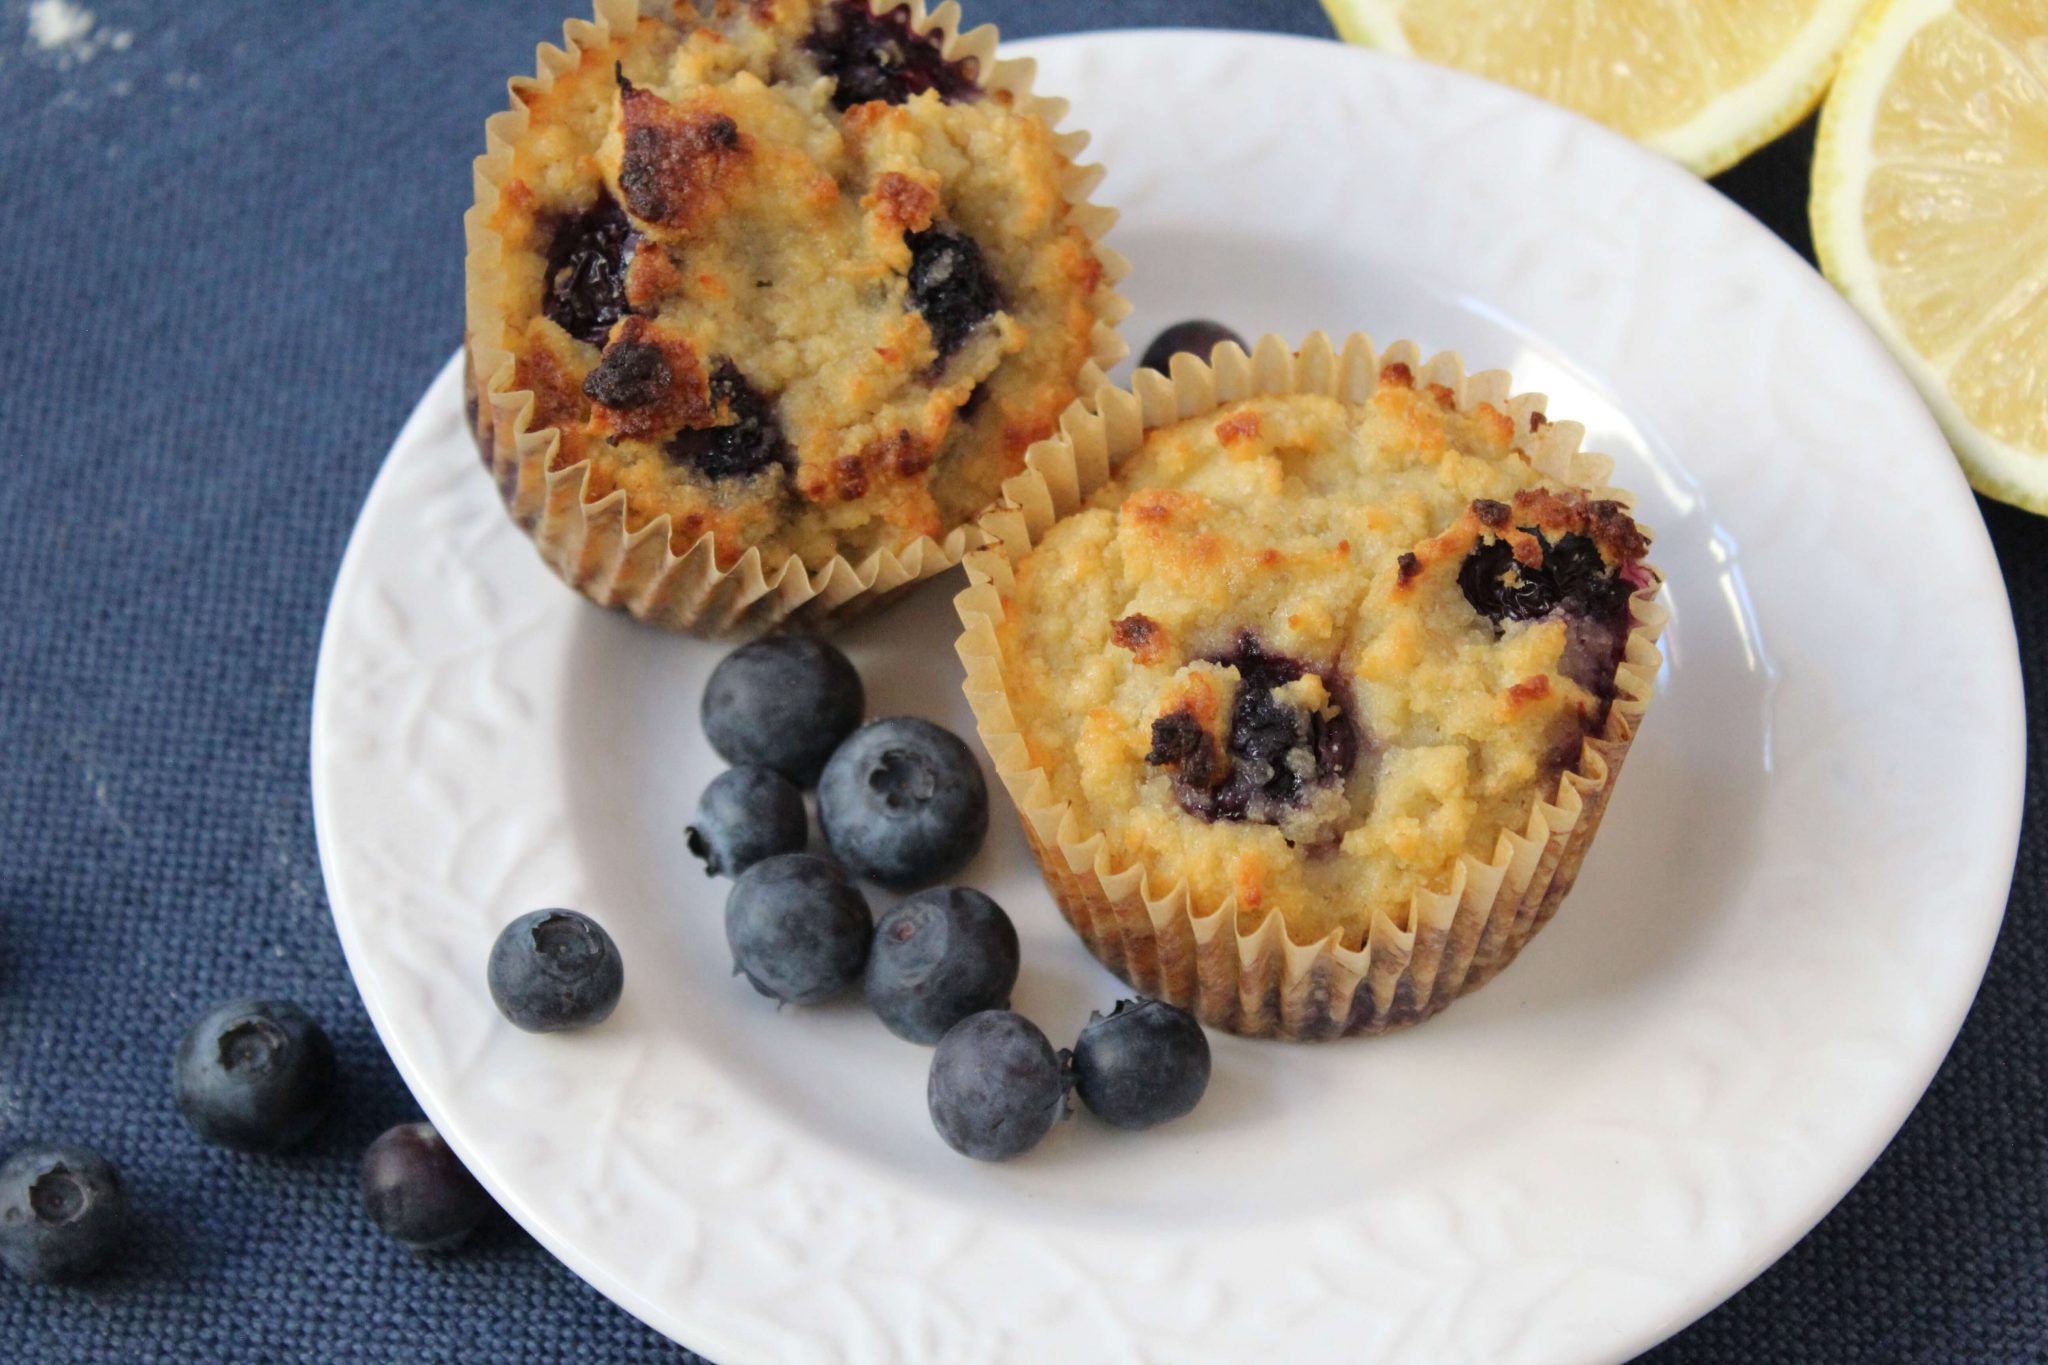 Coconut Flour Blueberry-Banana Muffins with Vanilla and Lemon